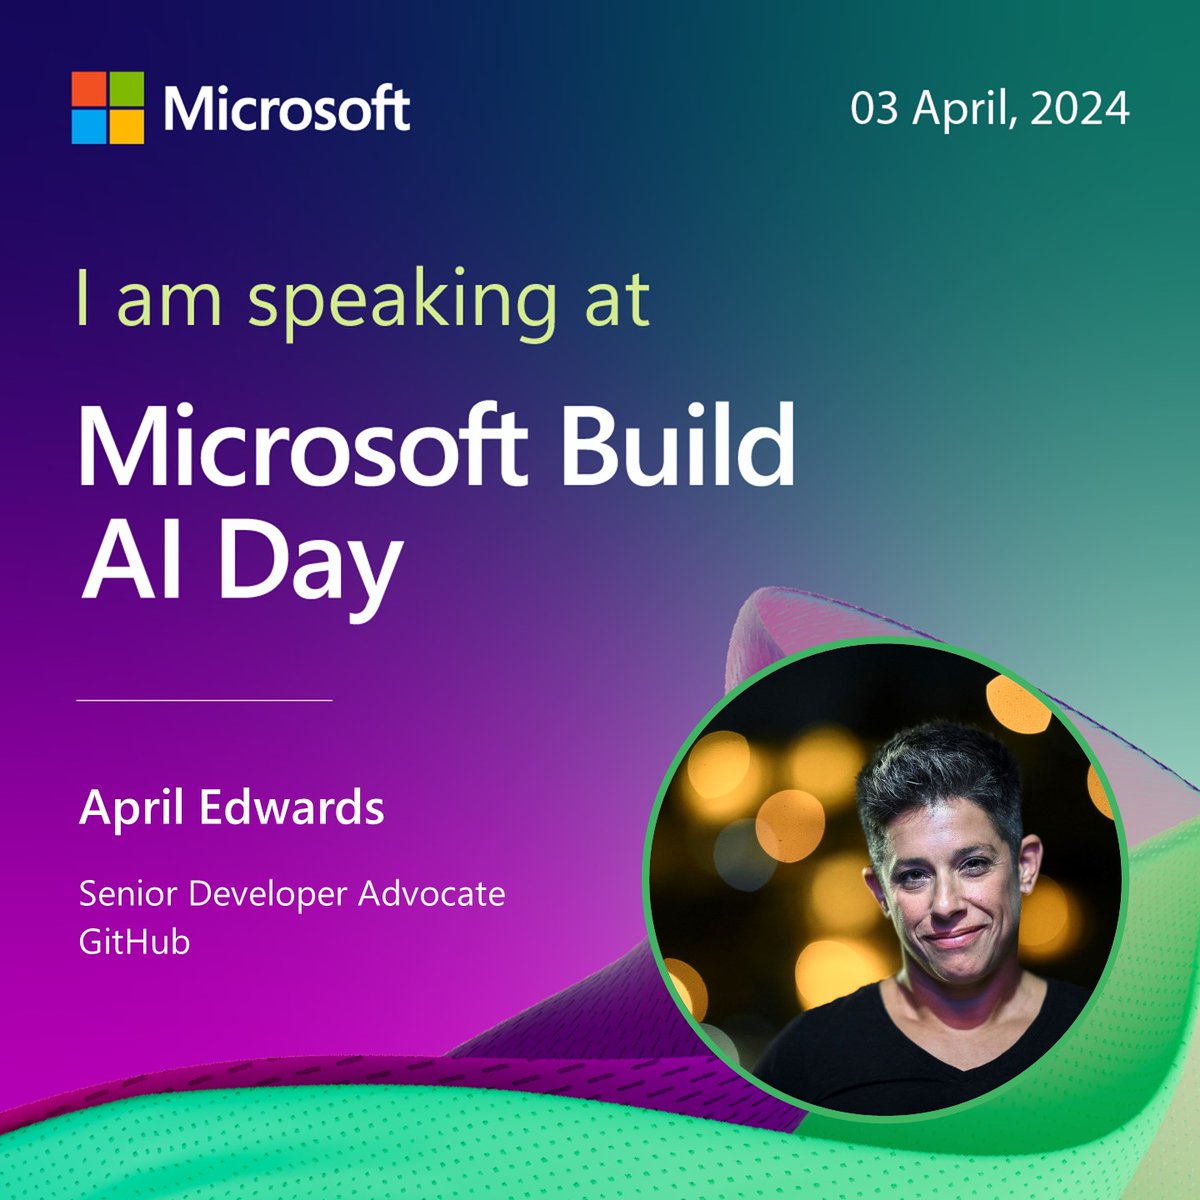 Looking forward to seeing everyone TOMORROW at Microsoft Build AI Day in Amsterdam! We're kicking it off first thing with all the new features of GitHub Copilot! @github @microsoftnl #Github #GitHubCopilot #AI #developer